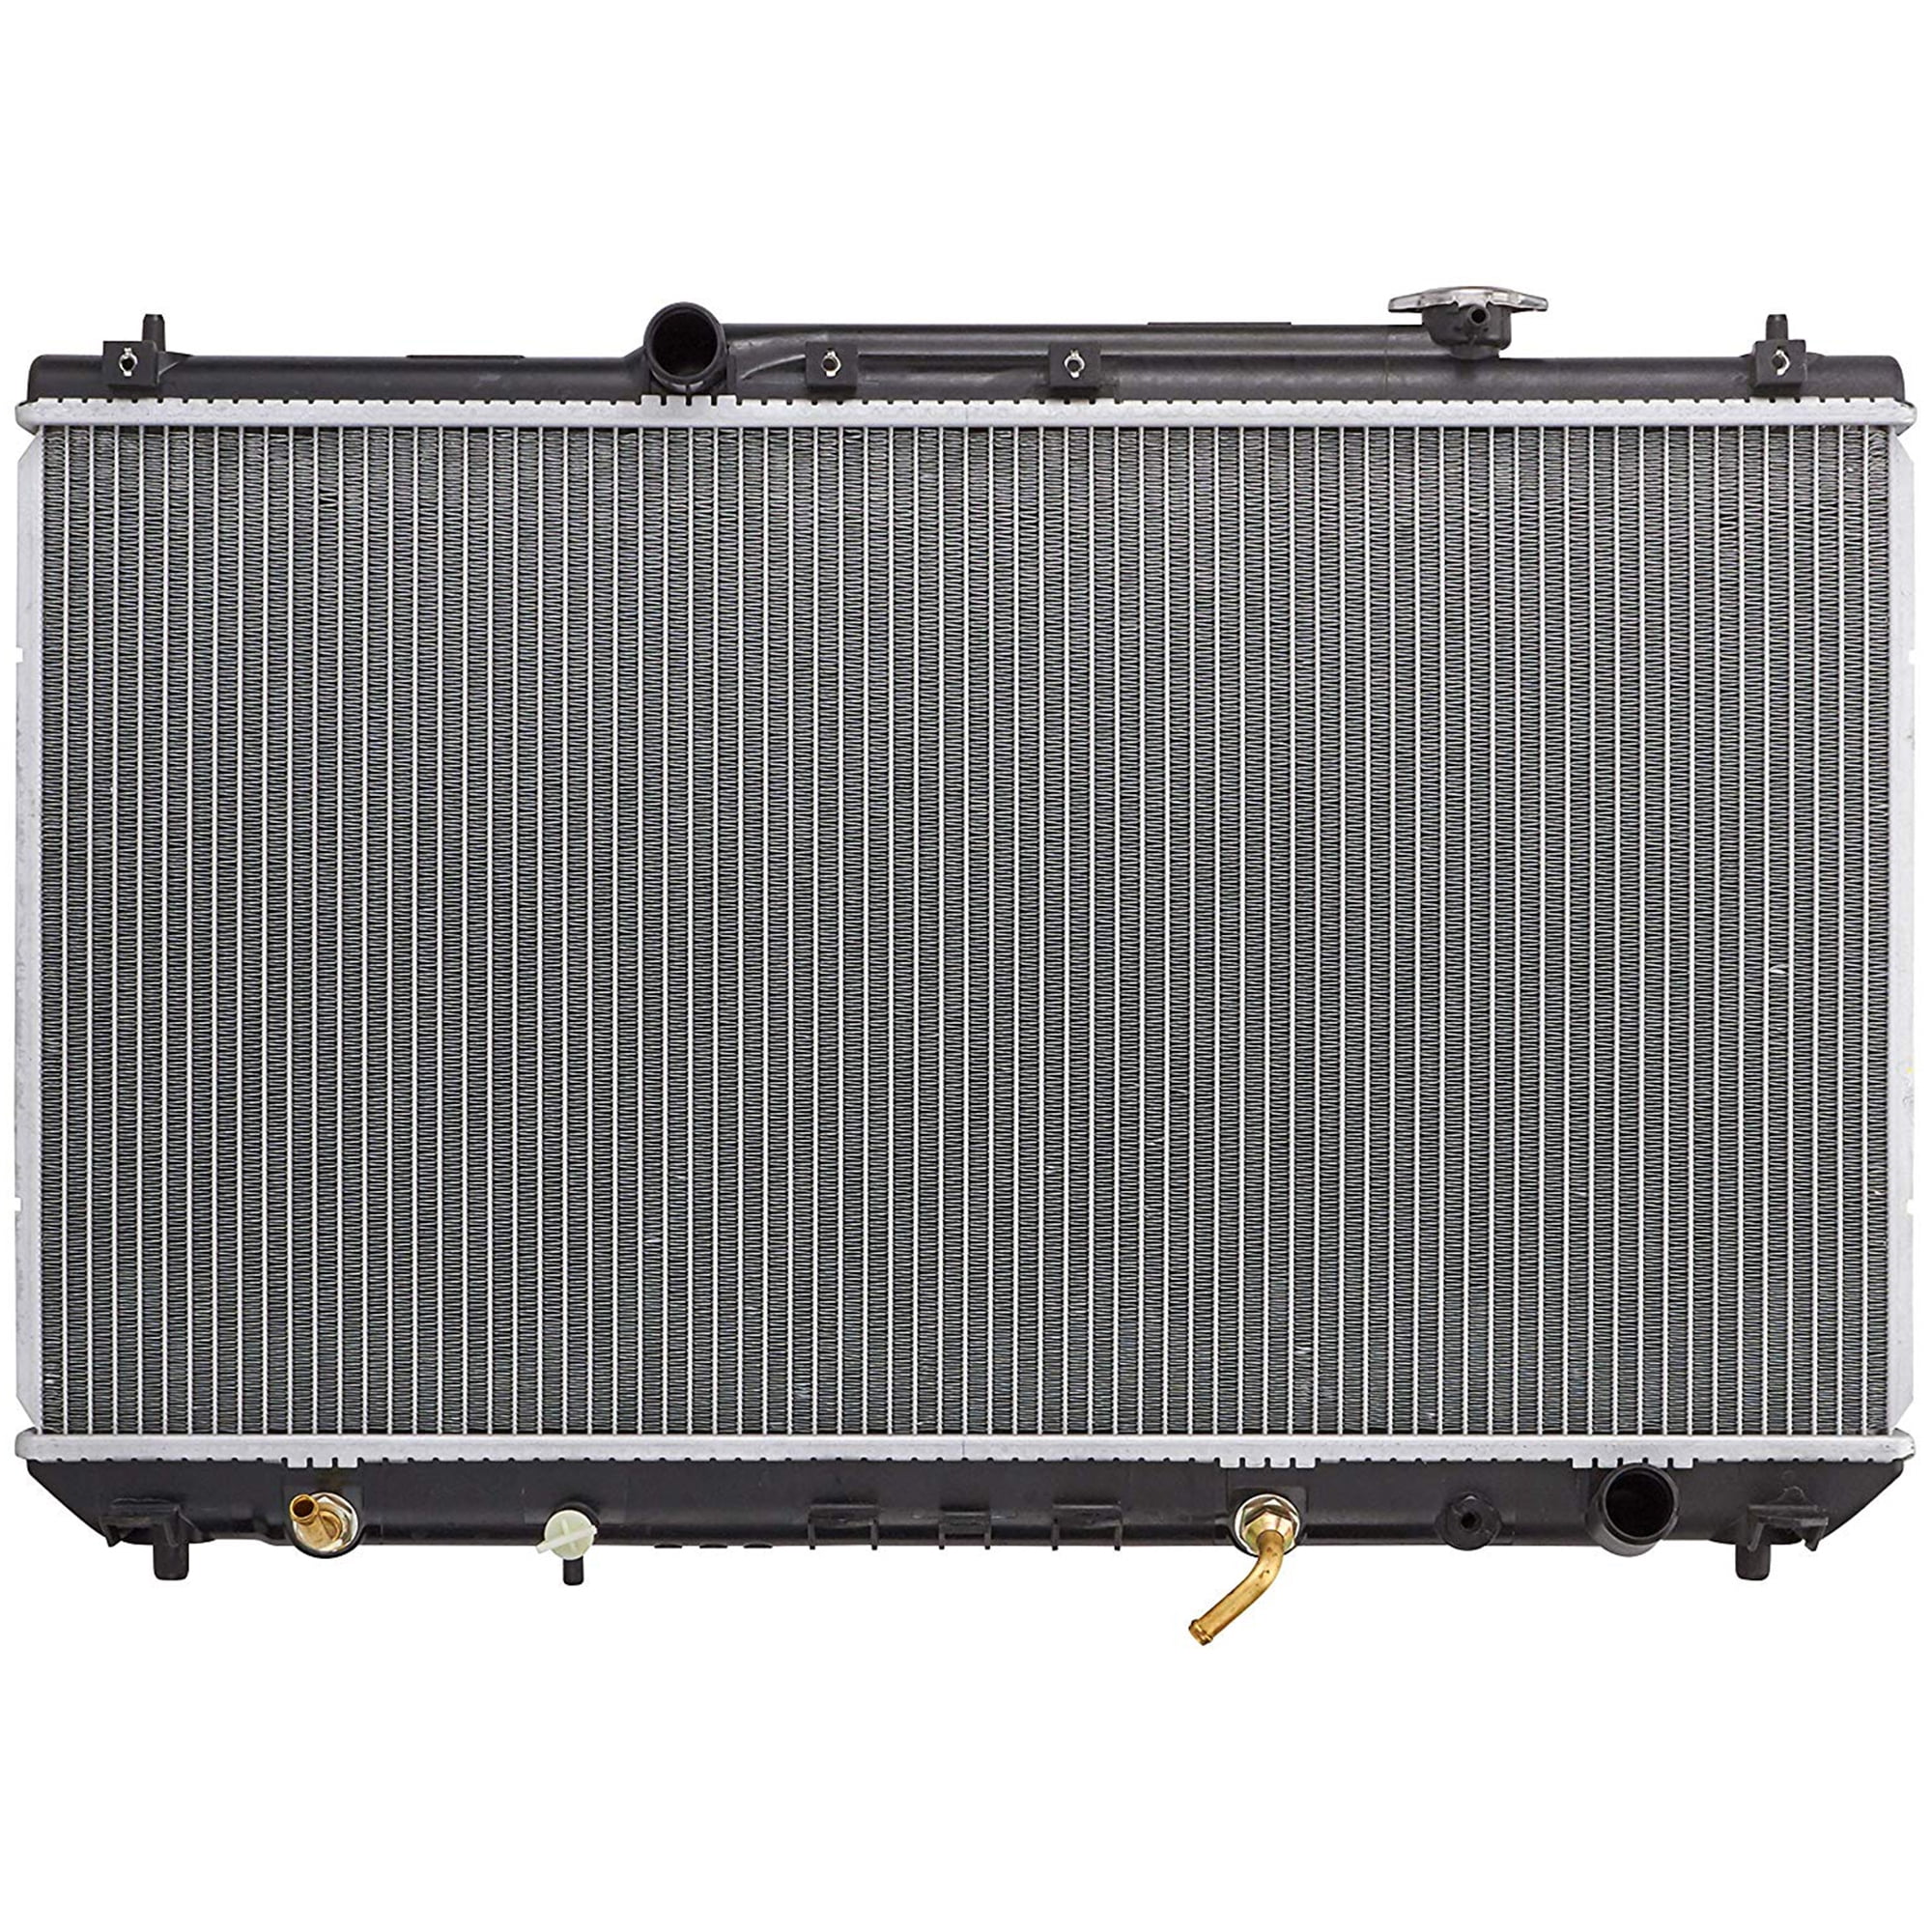 Radiator for Toyota Camry 2.2L L4 4Cyl 92-96 Auto 93 94 95 1996